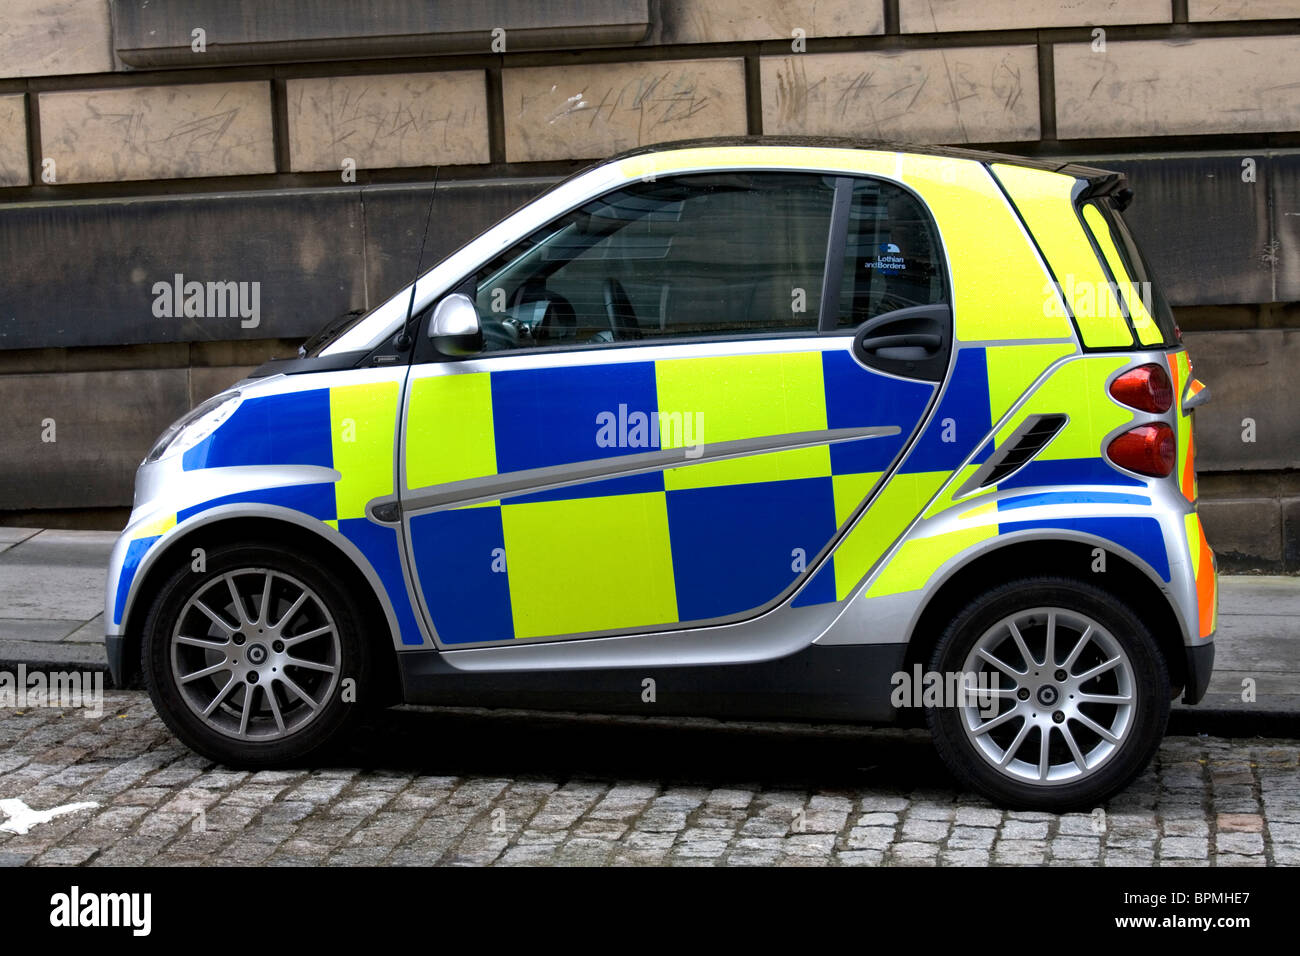 Lothian and Borders police car.  Now Police Scotland. A Smart car.  The model is called a Passion. Stock Photo